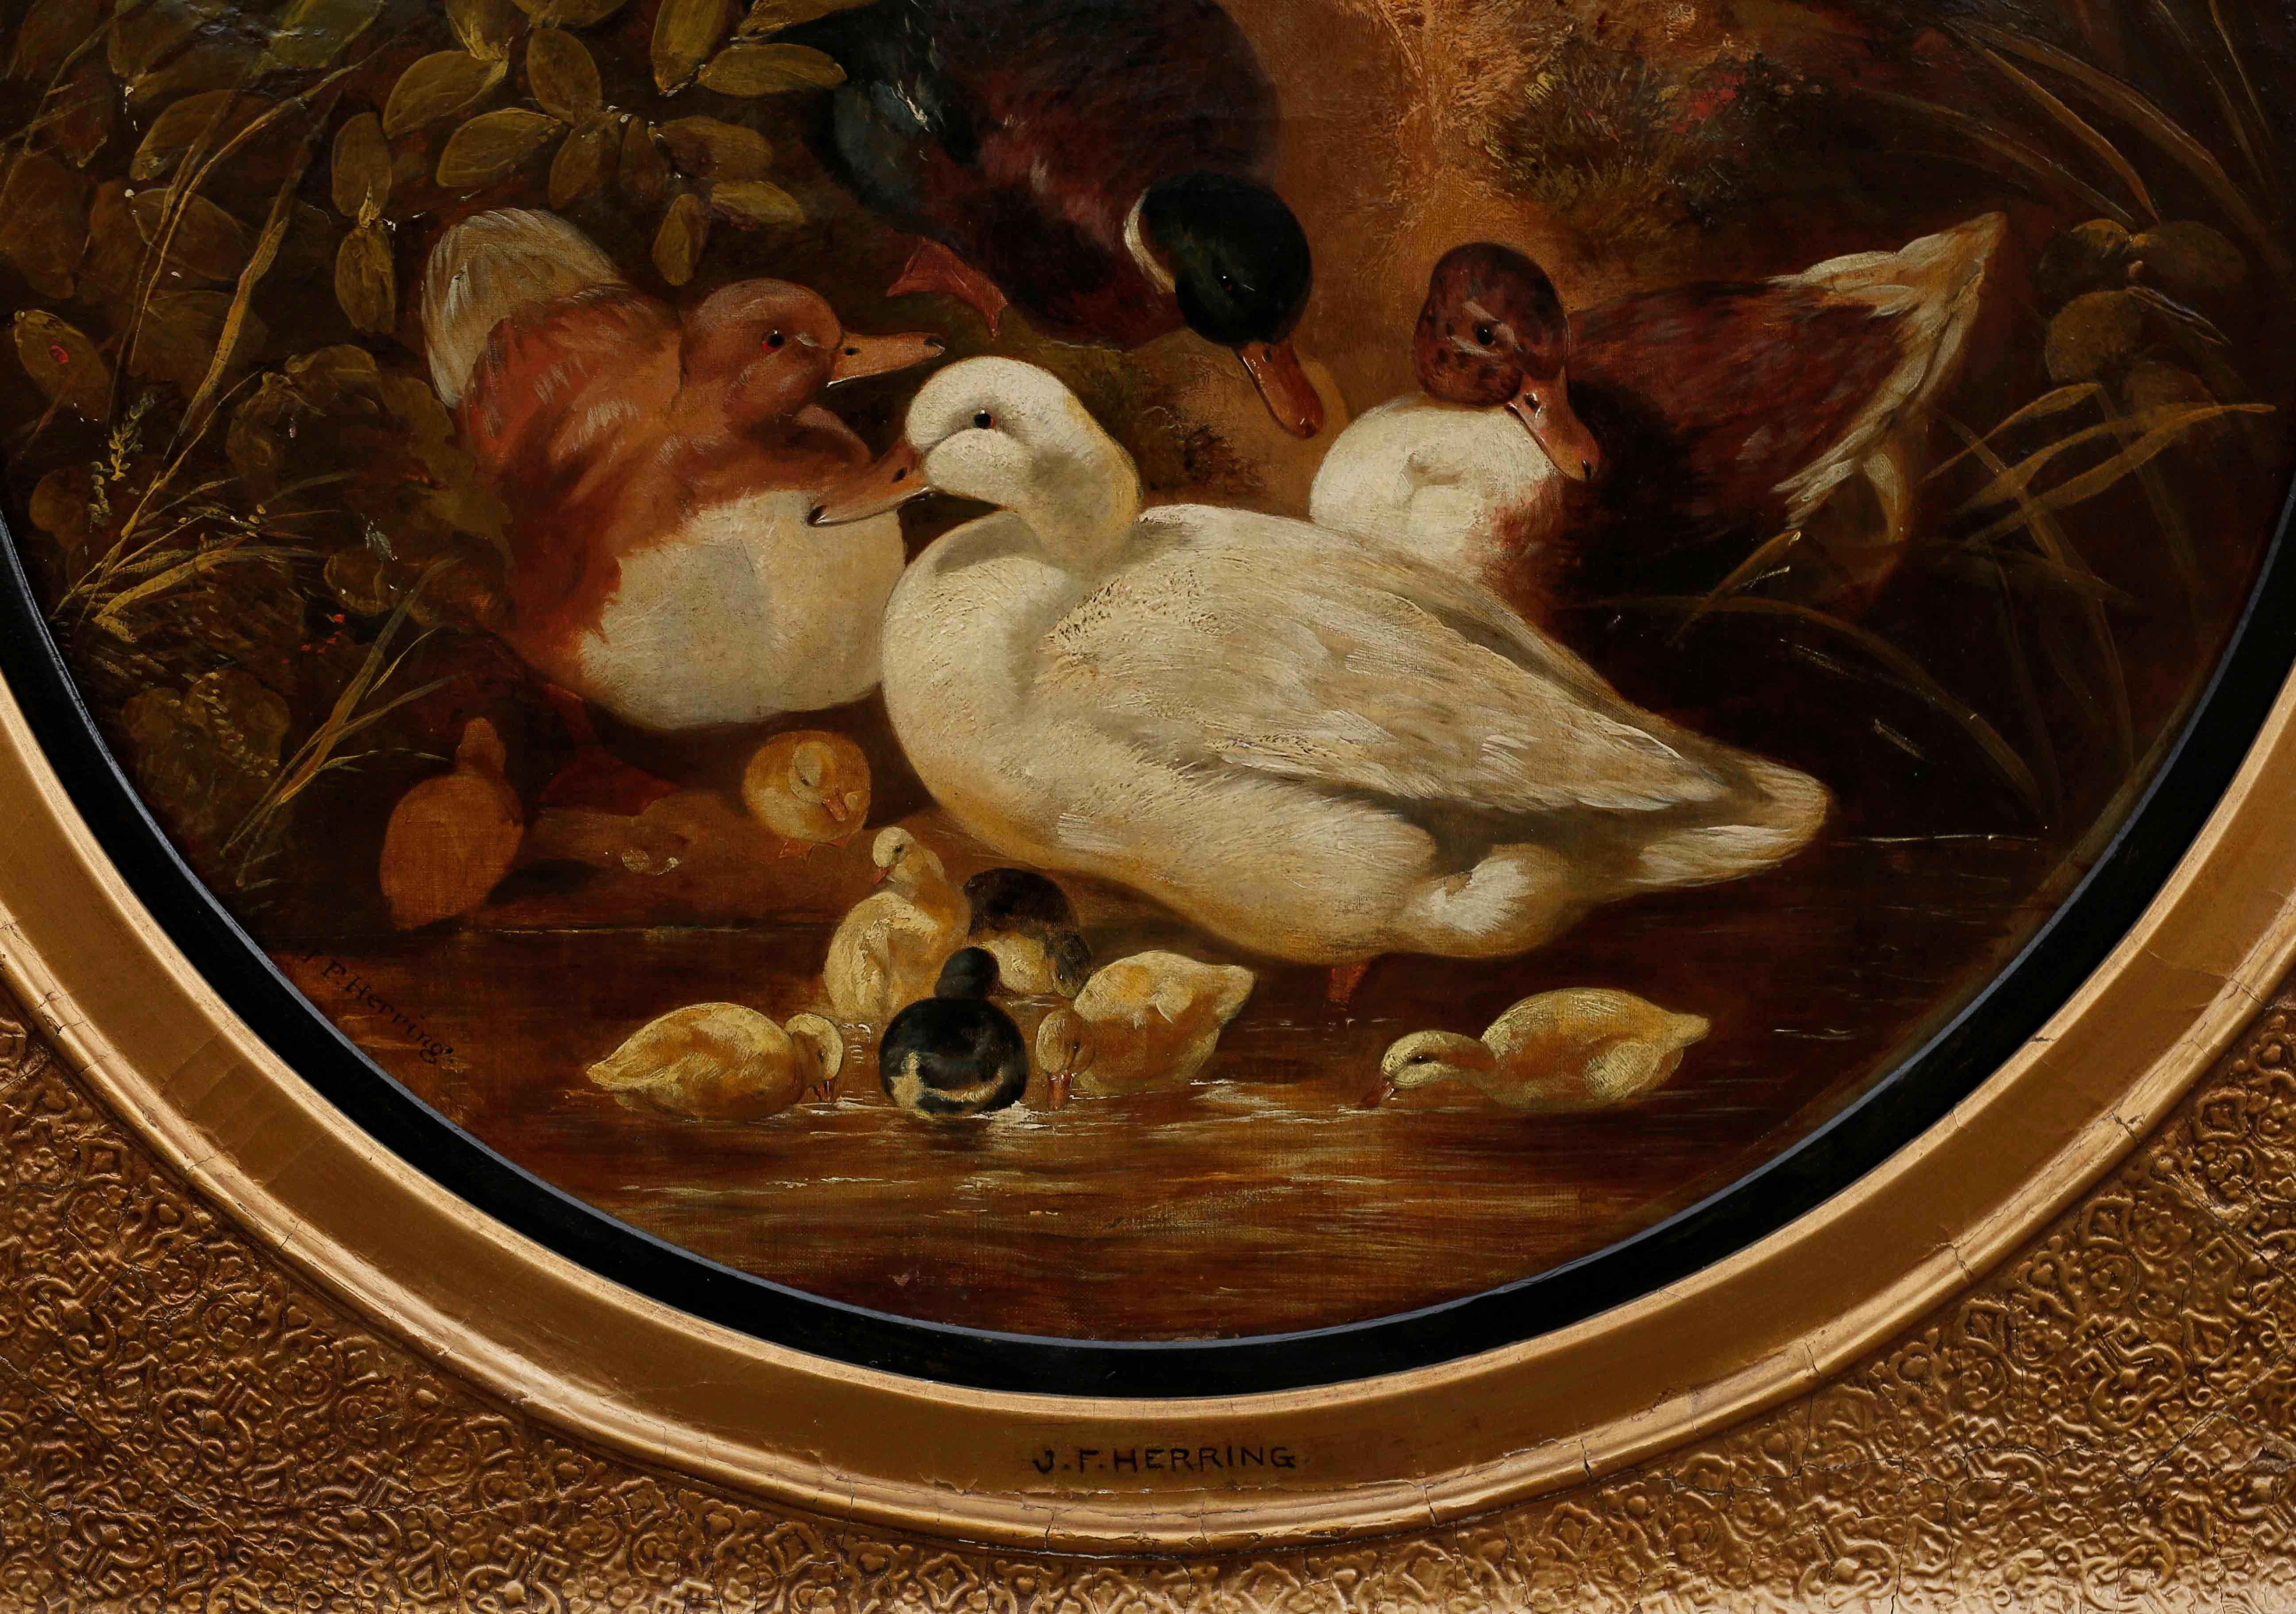 A charming painting by John Federick Herring, Sr. (1795-1865), the scene presents a mallard and family of ducks entering a stream, which is dominated by a white Aylesbury duck. Reeds and rushes frame the composition. The tondo painting is contained